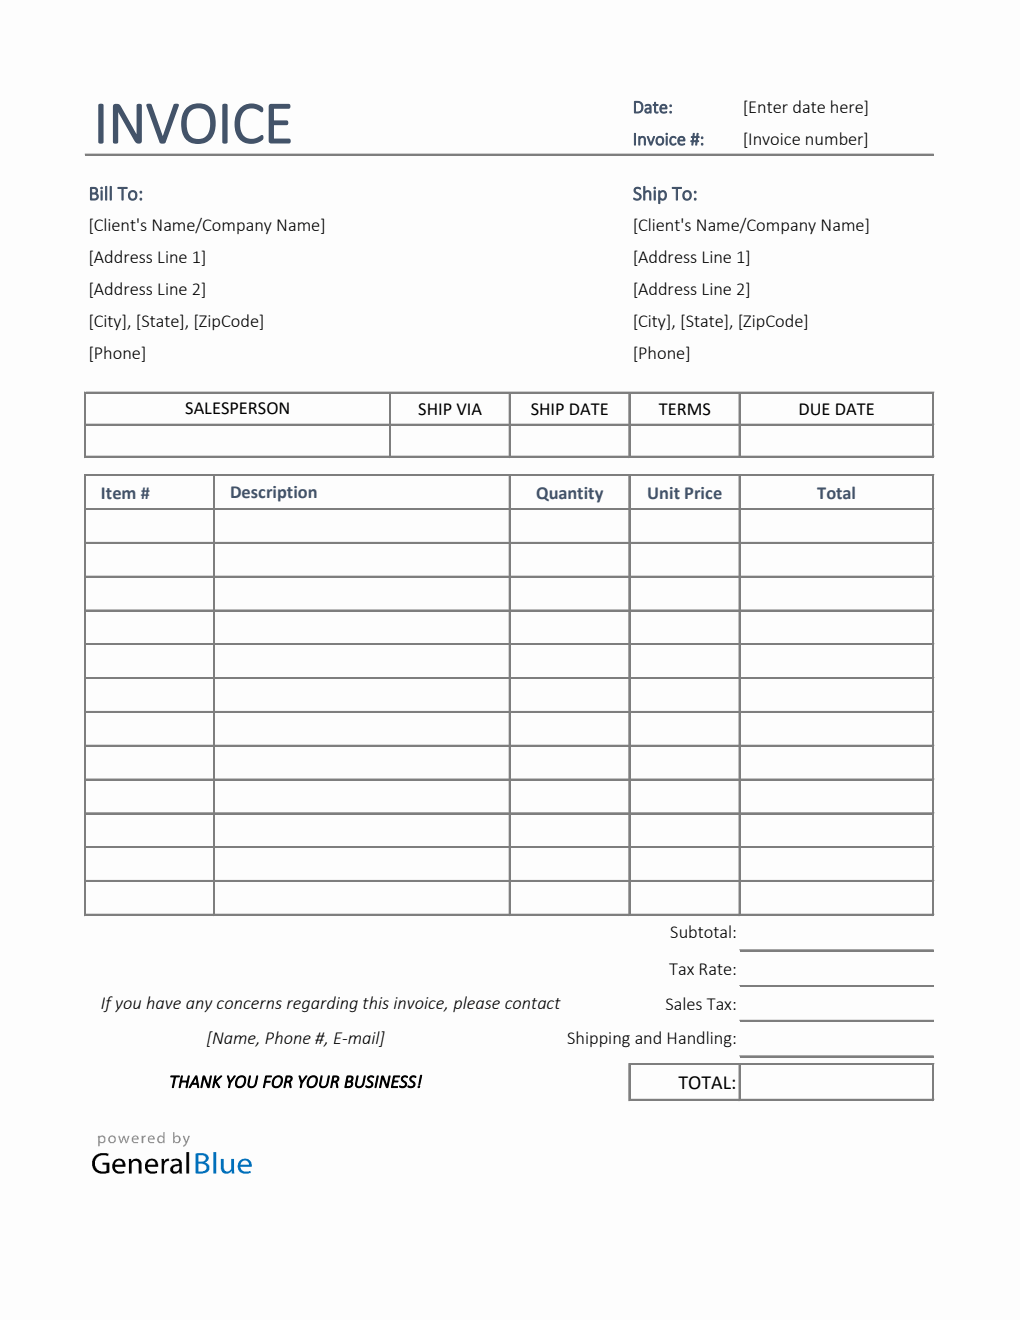 Sales Invoice Template in Excel (Simple)